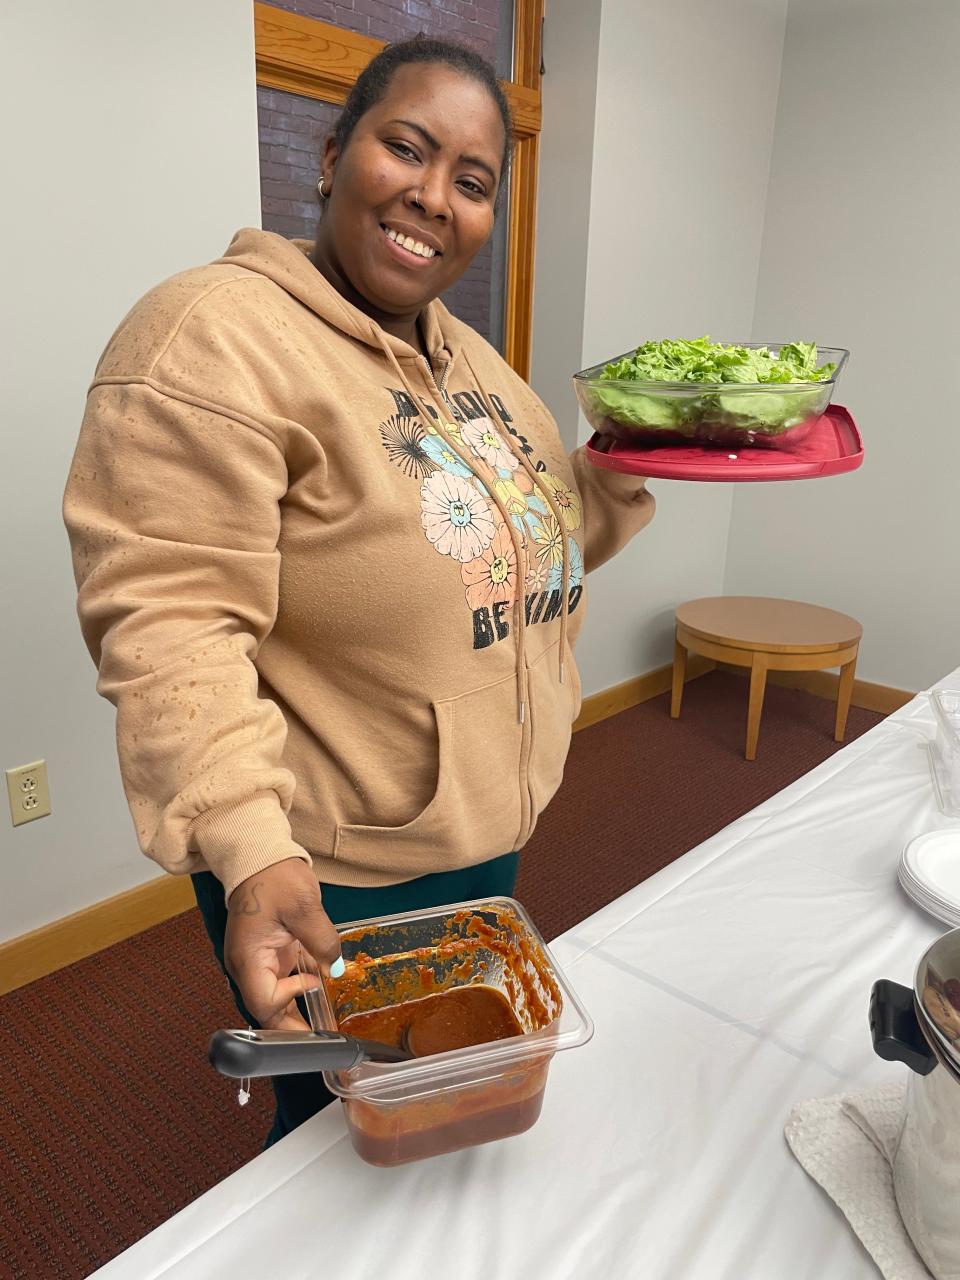 Wednesday's Cultural Cooking Club at Otis Library was the second for Allana Holmes. For that night's Korean theme, she made Leaf Wraps and Rice with a sauce.